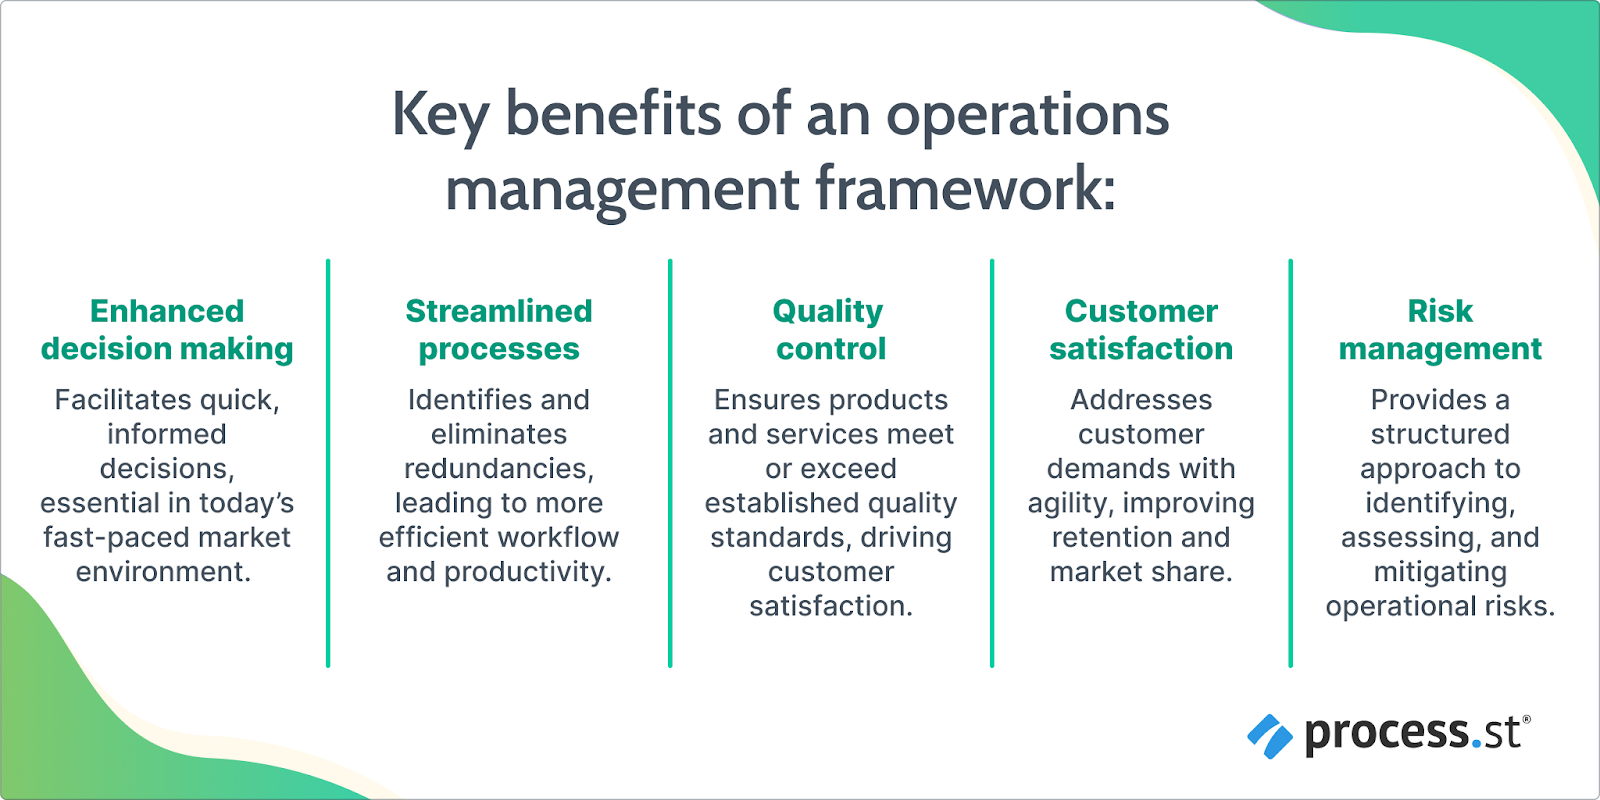 Image showing the benefits of using an operations management framework tool